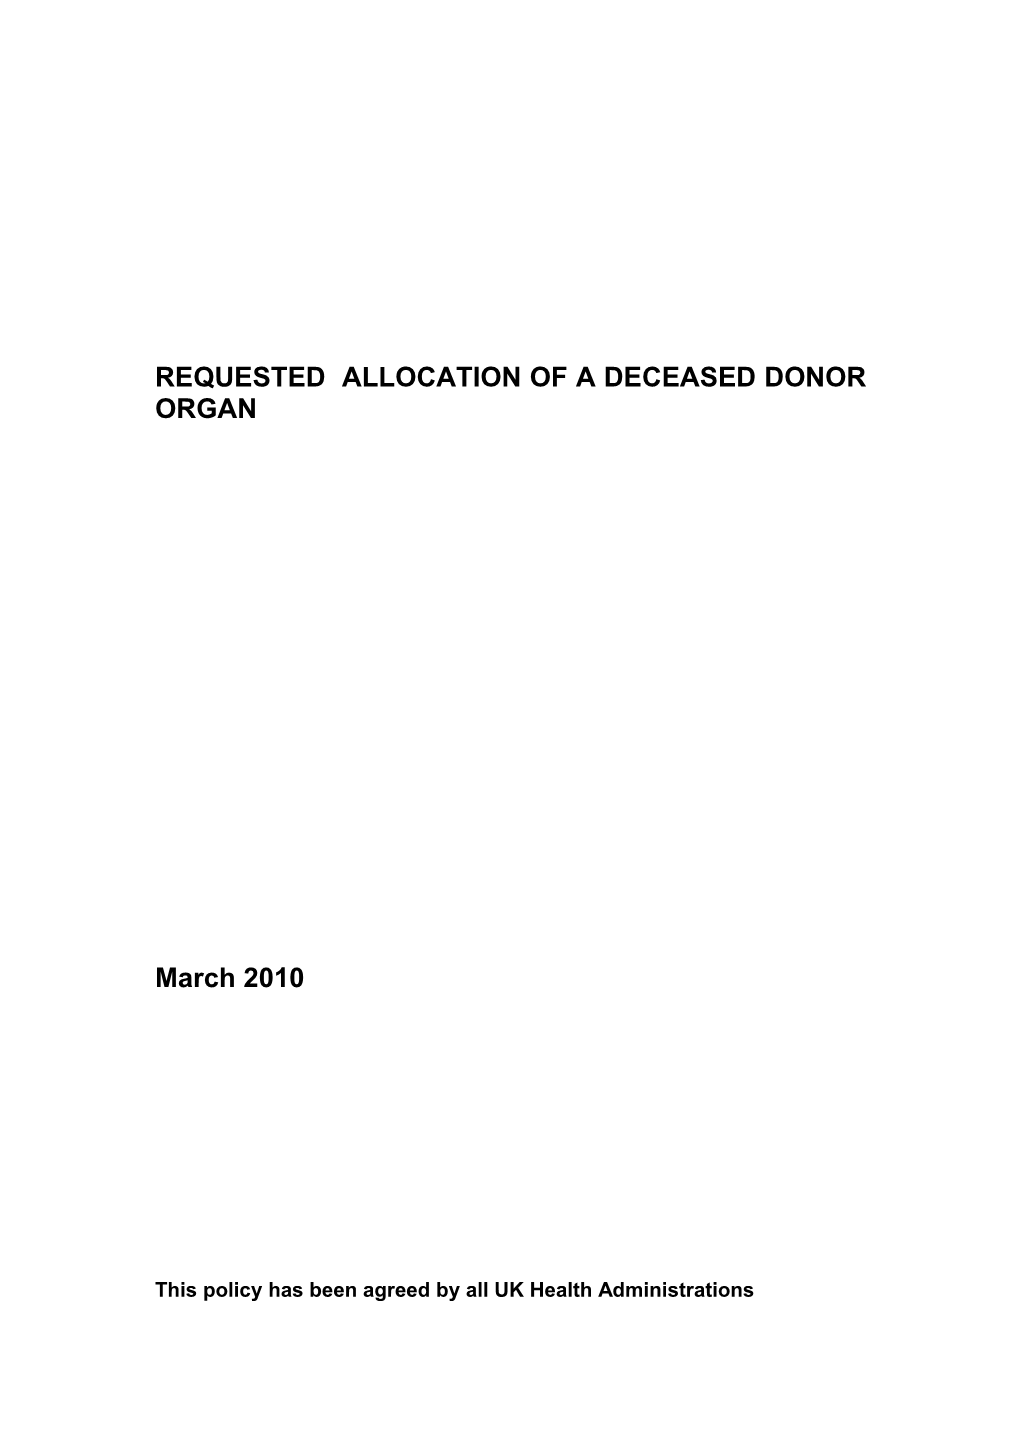 Requested Allocation of a Deceased Donor Organ